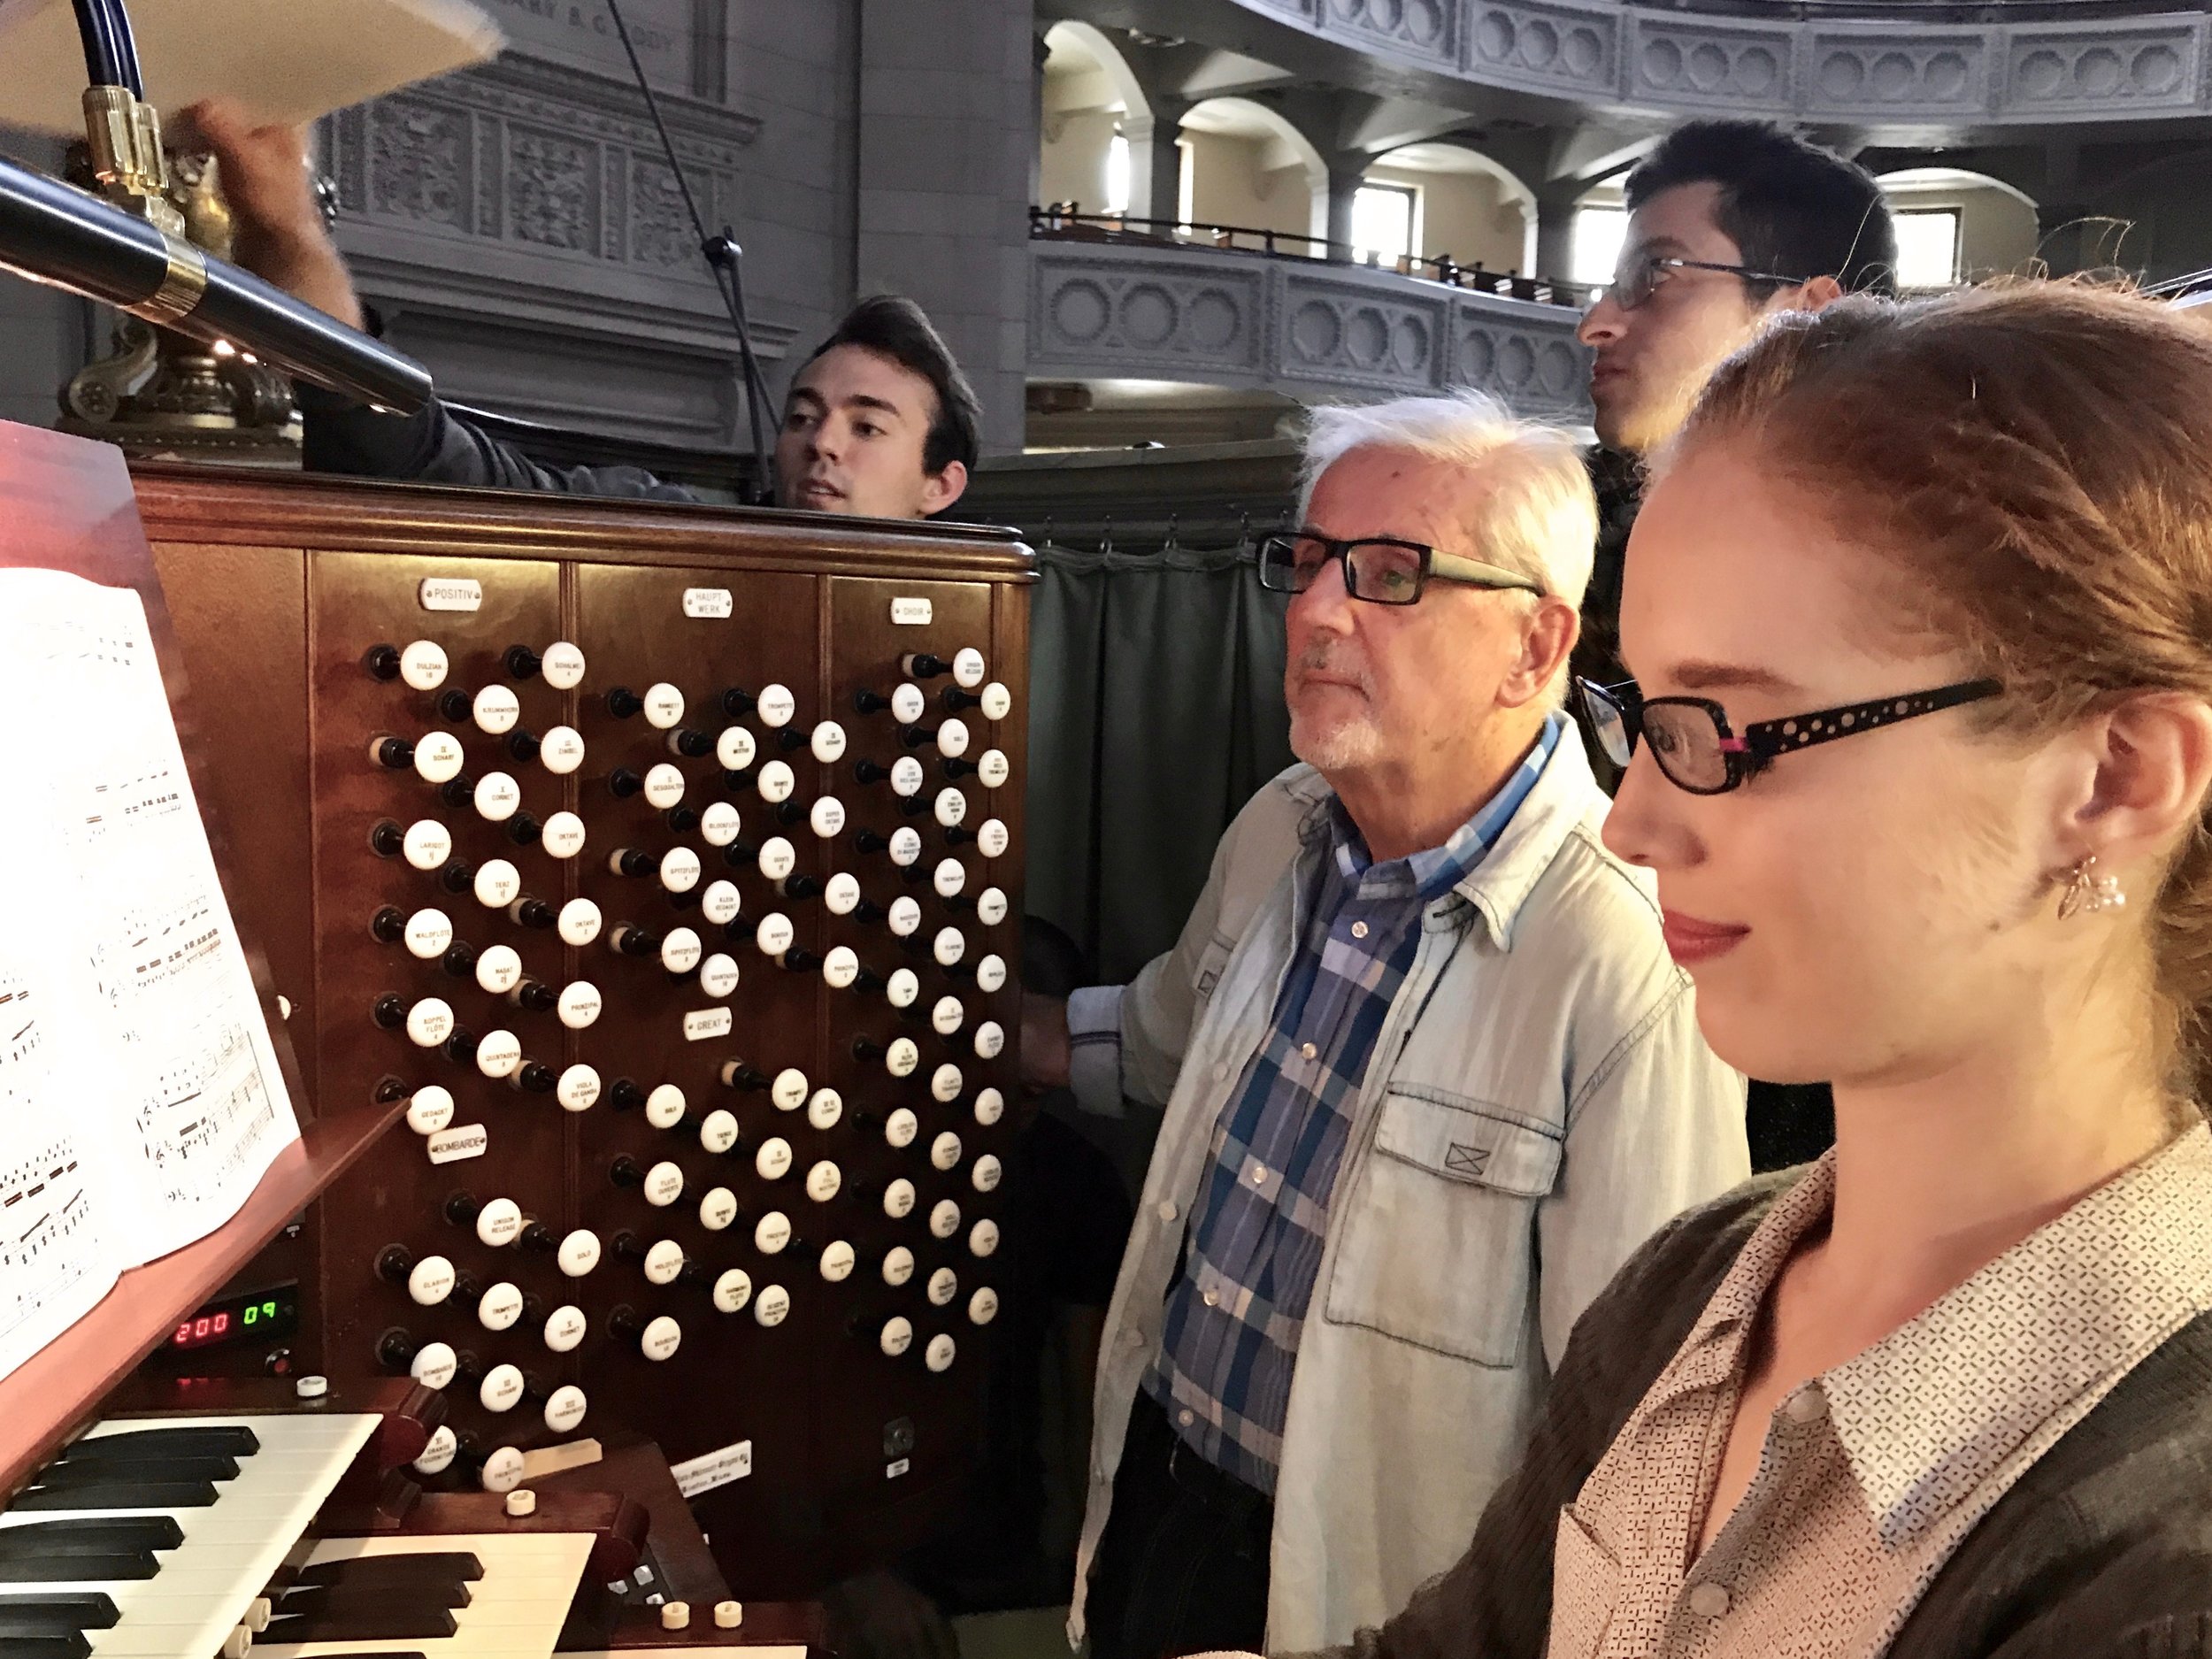  Stephen Loher assists Julia Kornick at the console of The Mother Church organ.&nbsp; 